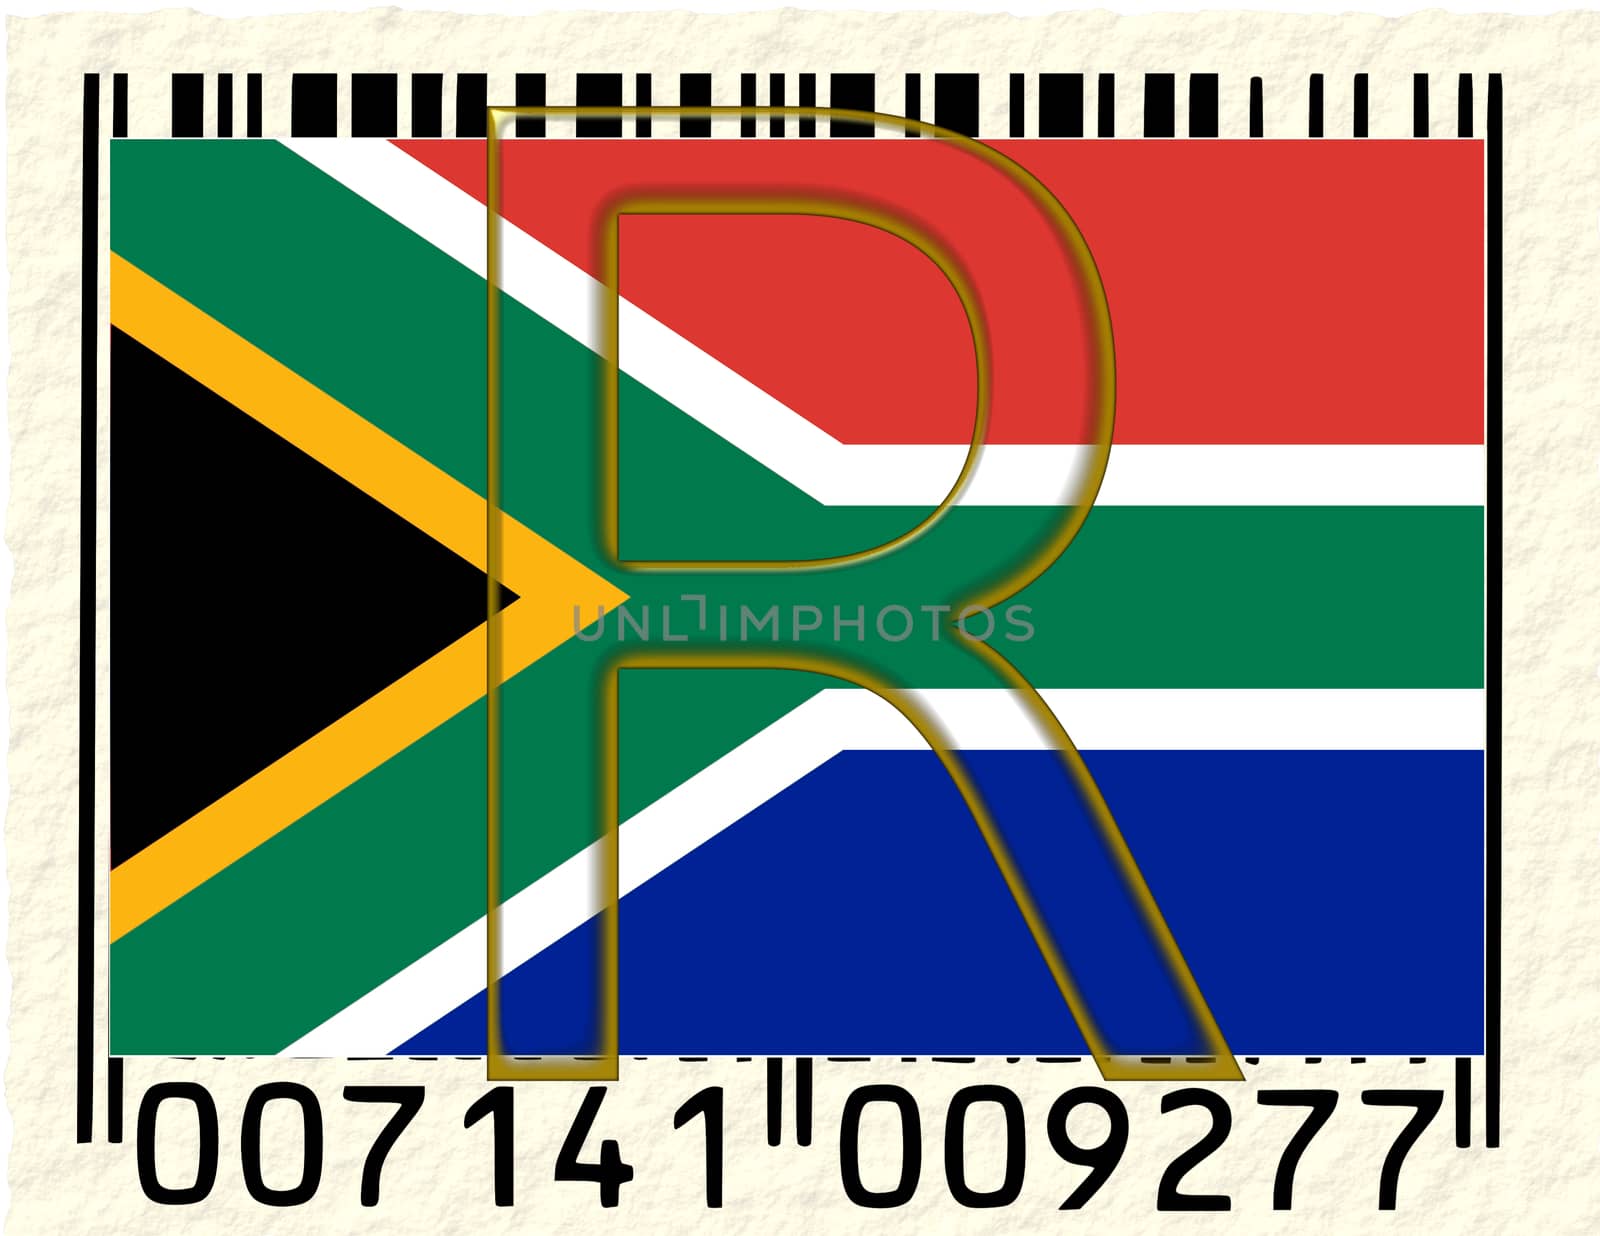 South Africa currency